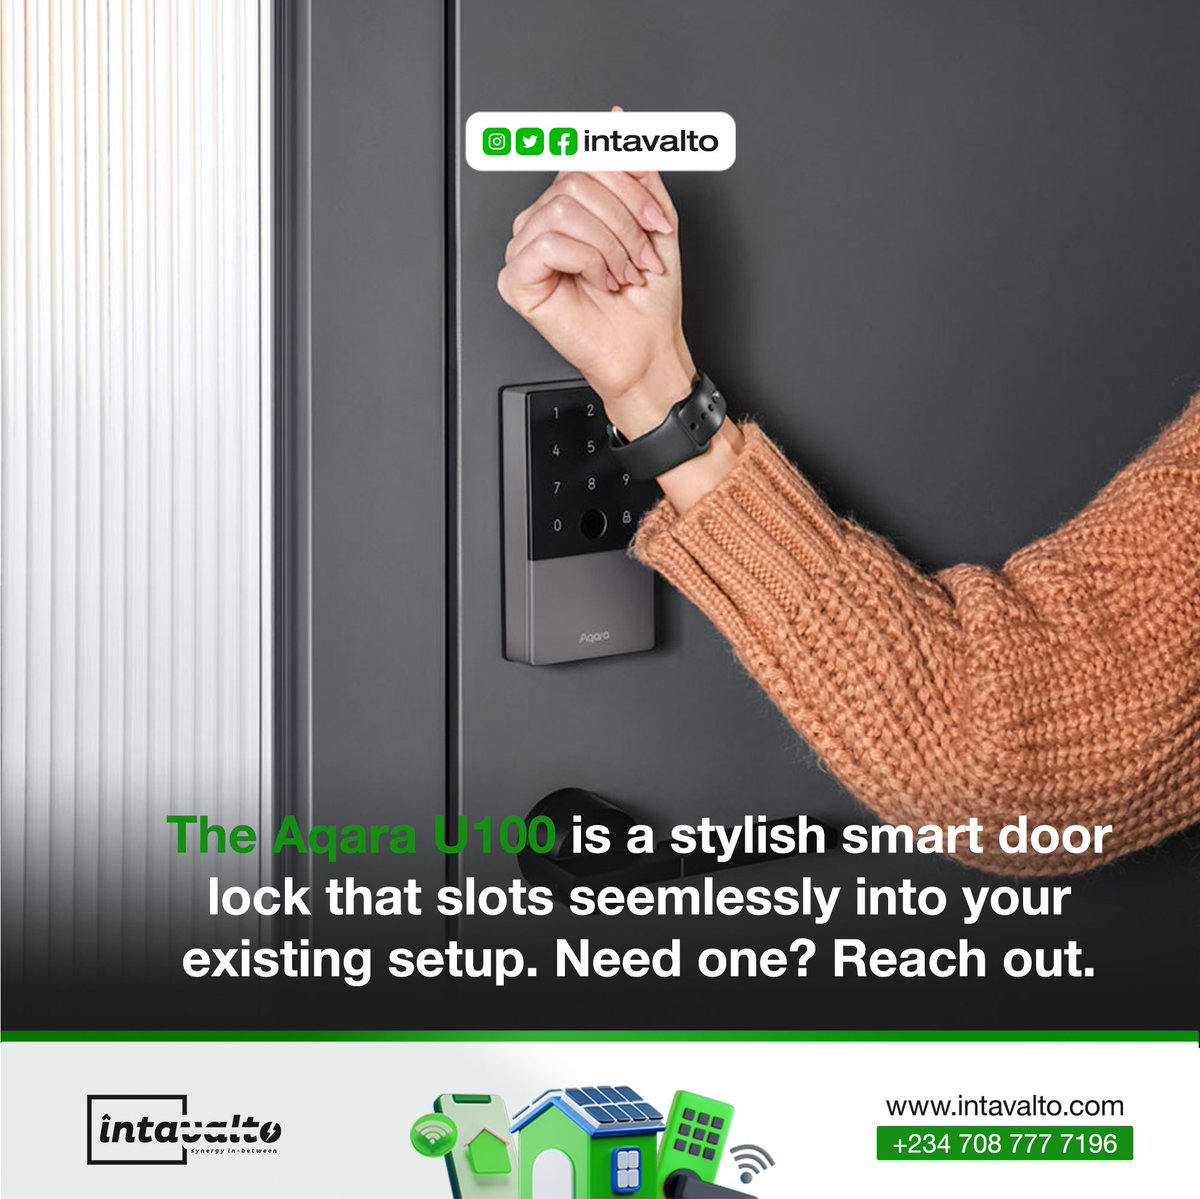 Sleek, secure, smart. Introducing the Aqara U100! Transform your home into a modern oasis of safety and convenience with this stylish and reliable smart lock. Get yours today! 

#U100
#HomeTech
#SmartHomeAutomation 
#SmartHome 
#SmartTech 
#intavalto⚡️